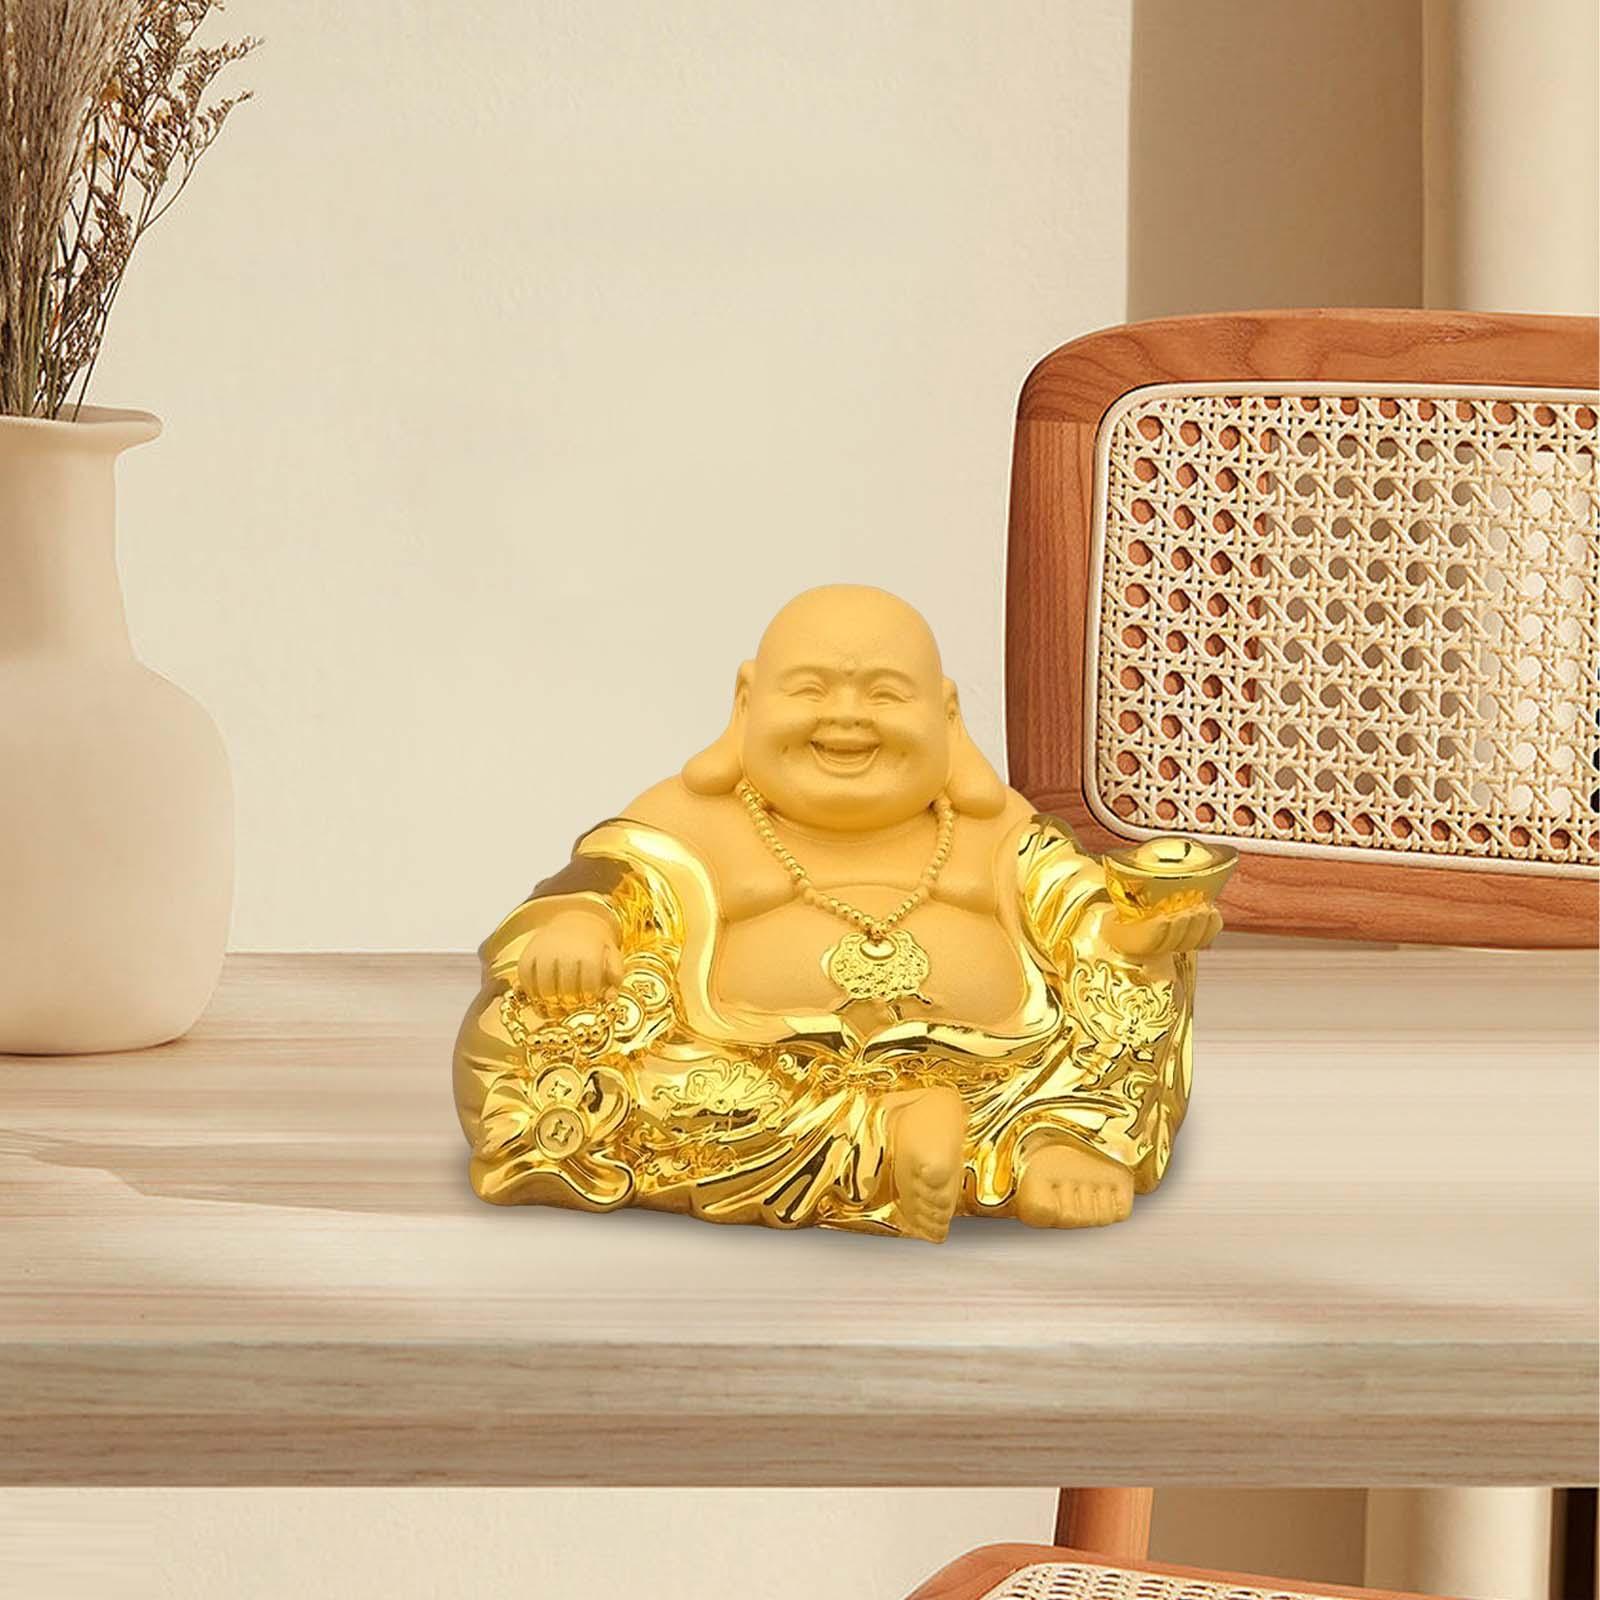 Resin Maitreya Buddha Statues Sculpture Luck Decoration Ornament for Table